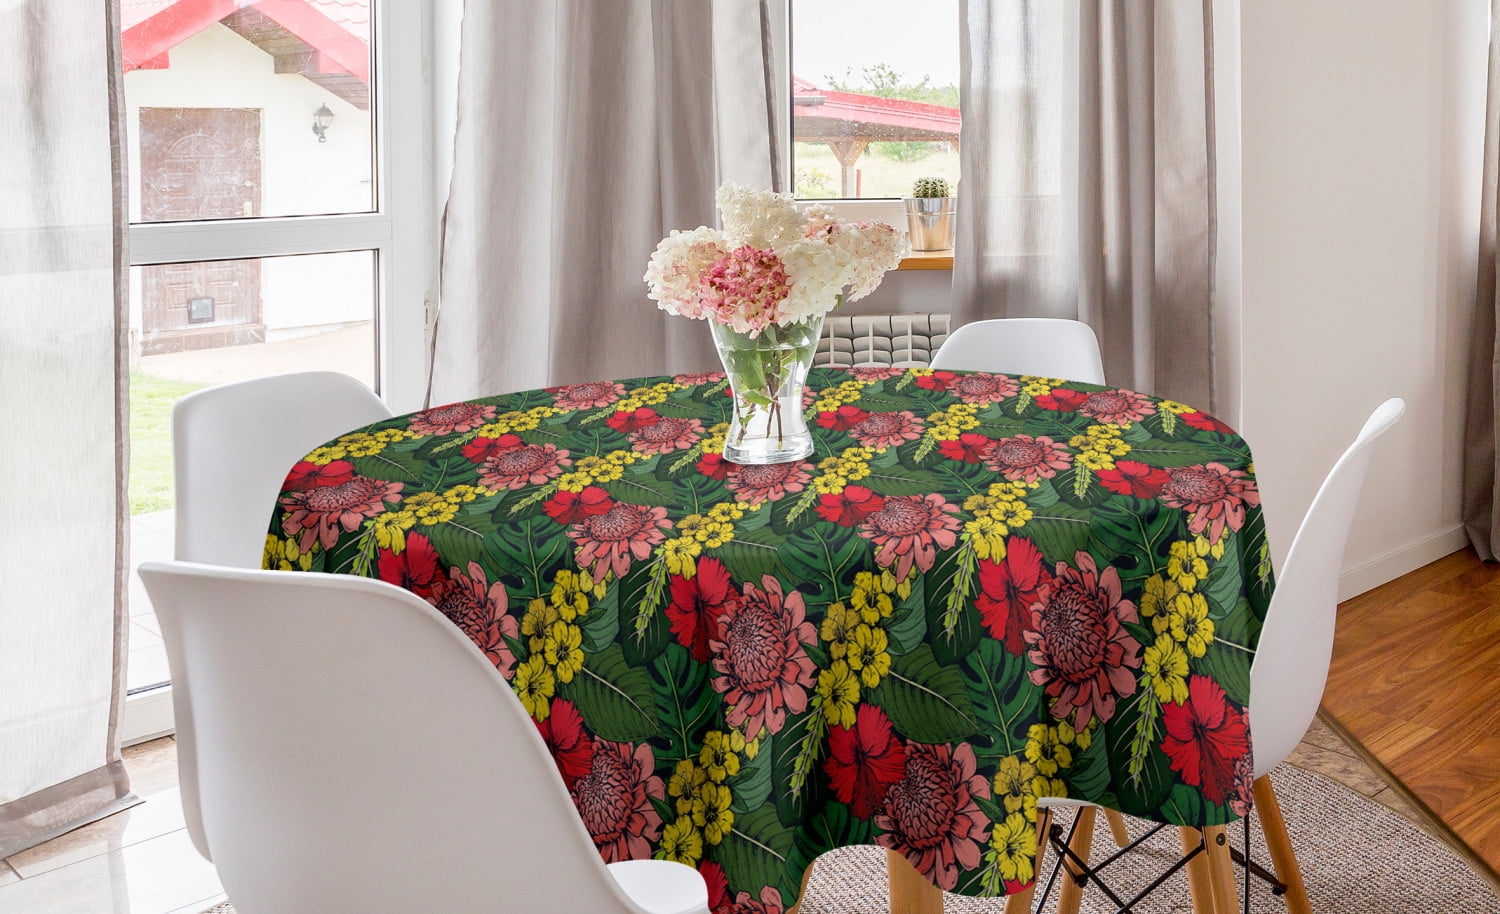 Green Magenta Turquoise Areca Palm Leaves Hibiscus Blooms and Limes Rainforest Foliage Plants Ambesonne Jungle Tablecloth Rectangular Table Cover for Dining Room Kitchen Decor 52 X 70